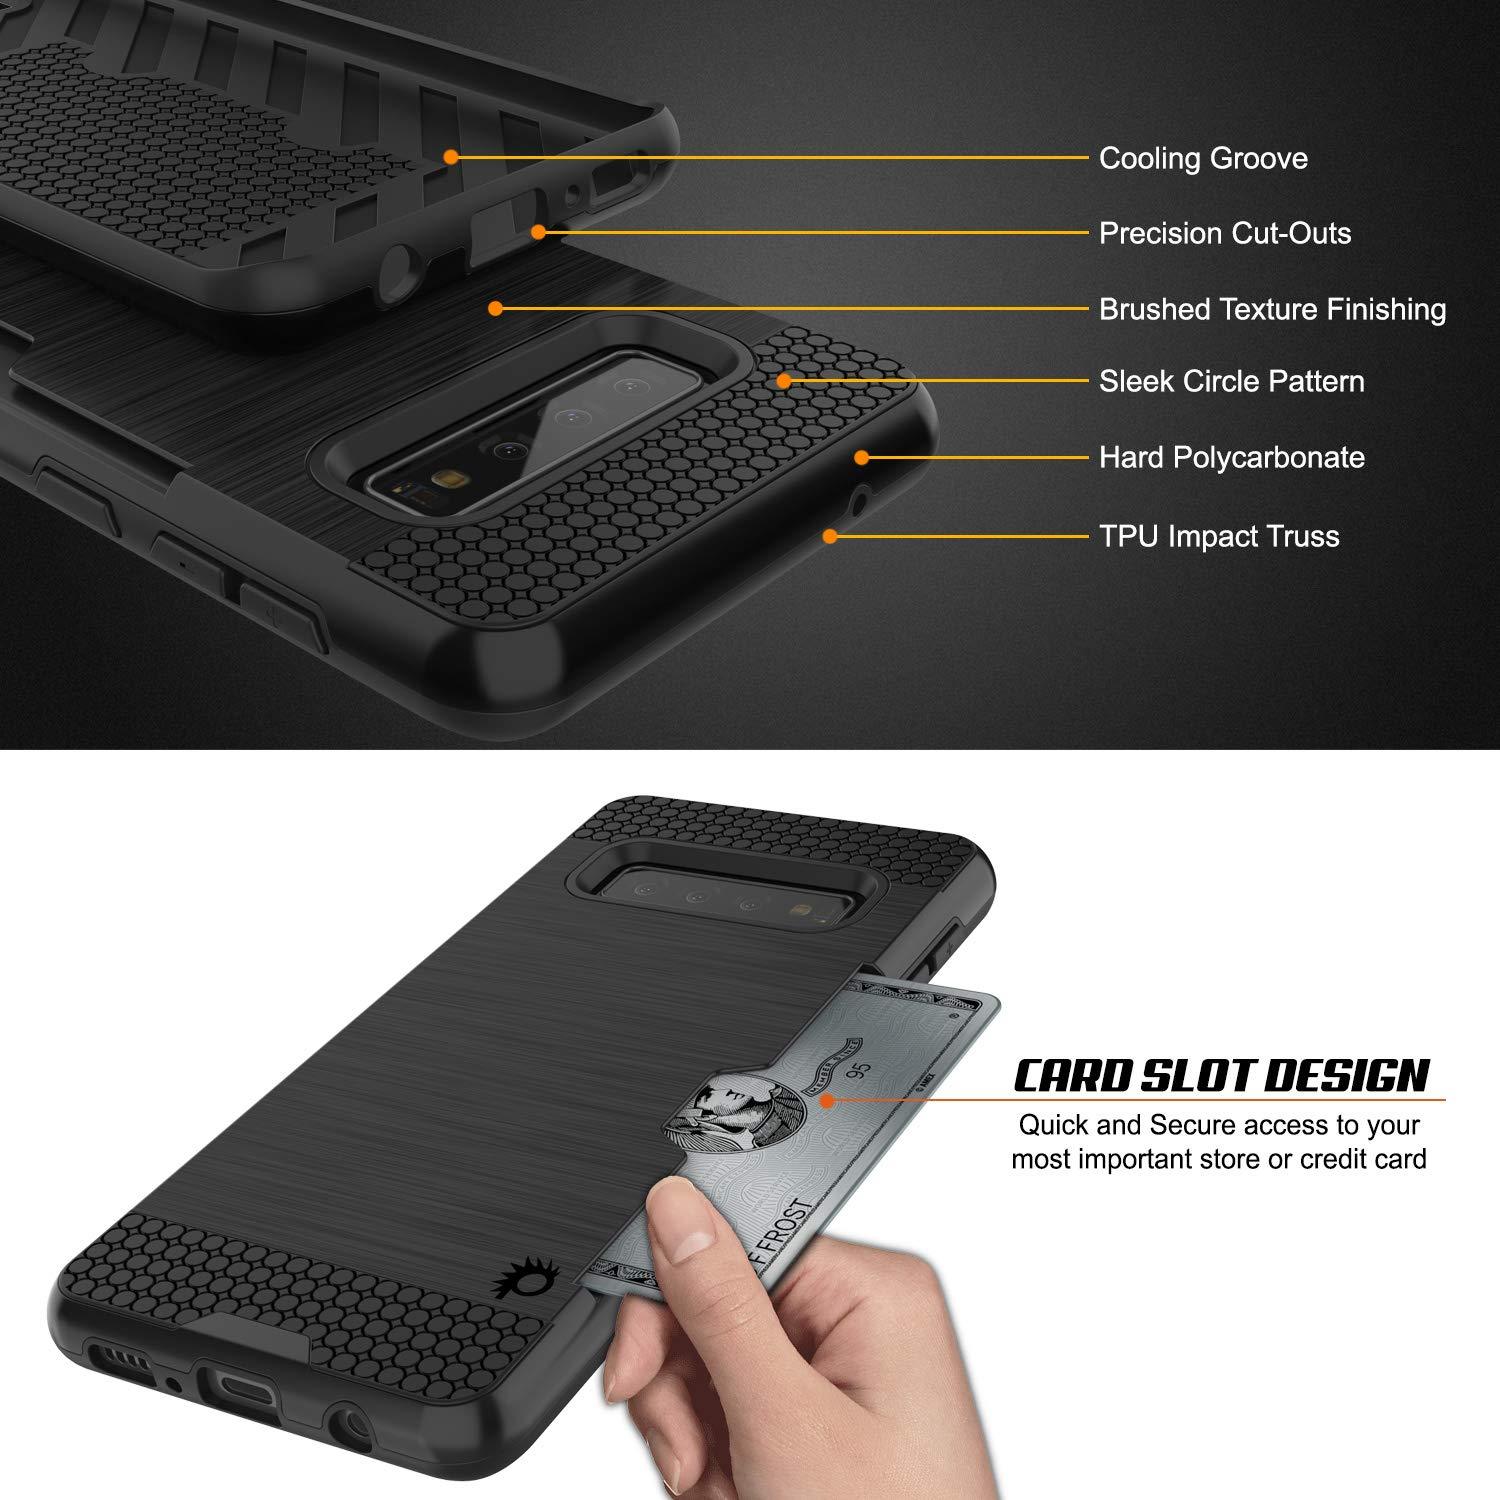 Galaxy S10e Case, PUNKcase [SLOT Series] [Slim Fit] Dual-Layer Armor Cover w/Integrated Anti-Shock System, Credit Card Slot [Black]